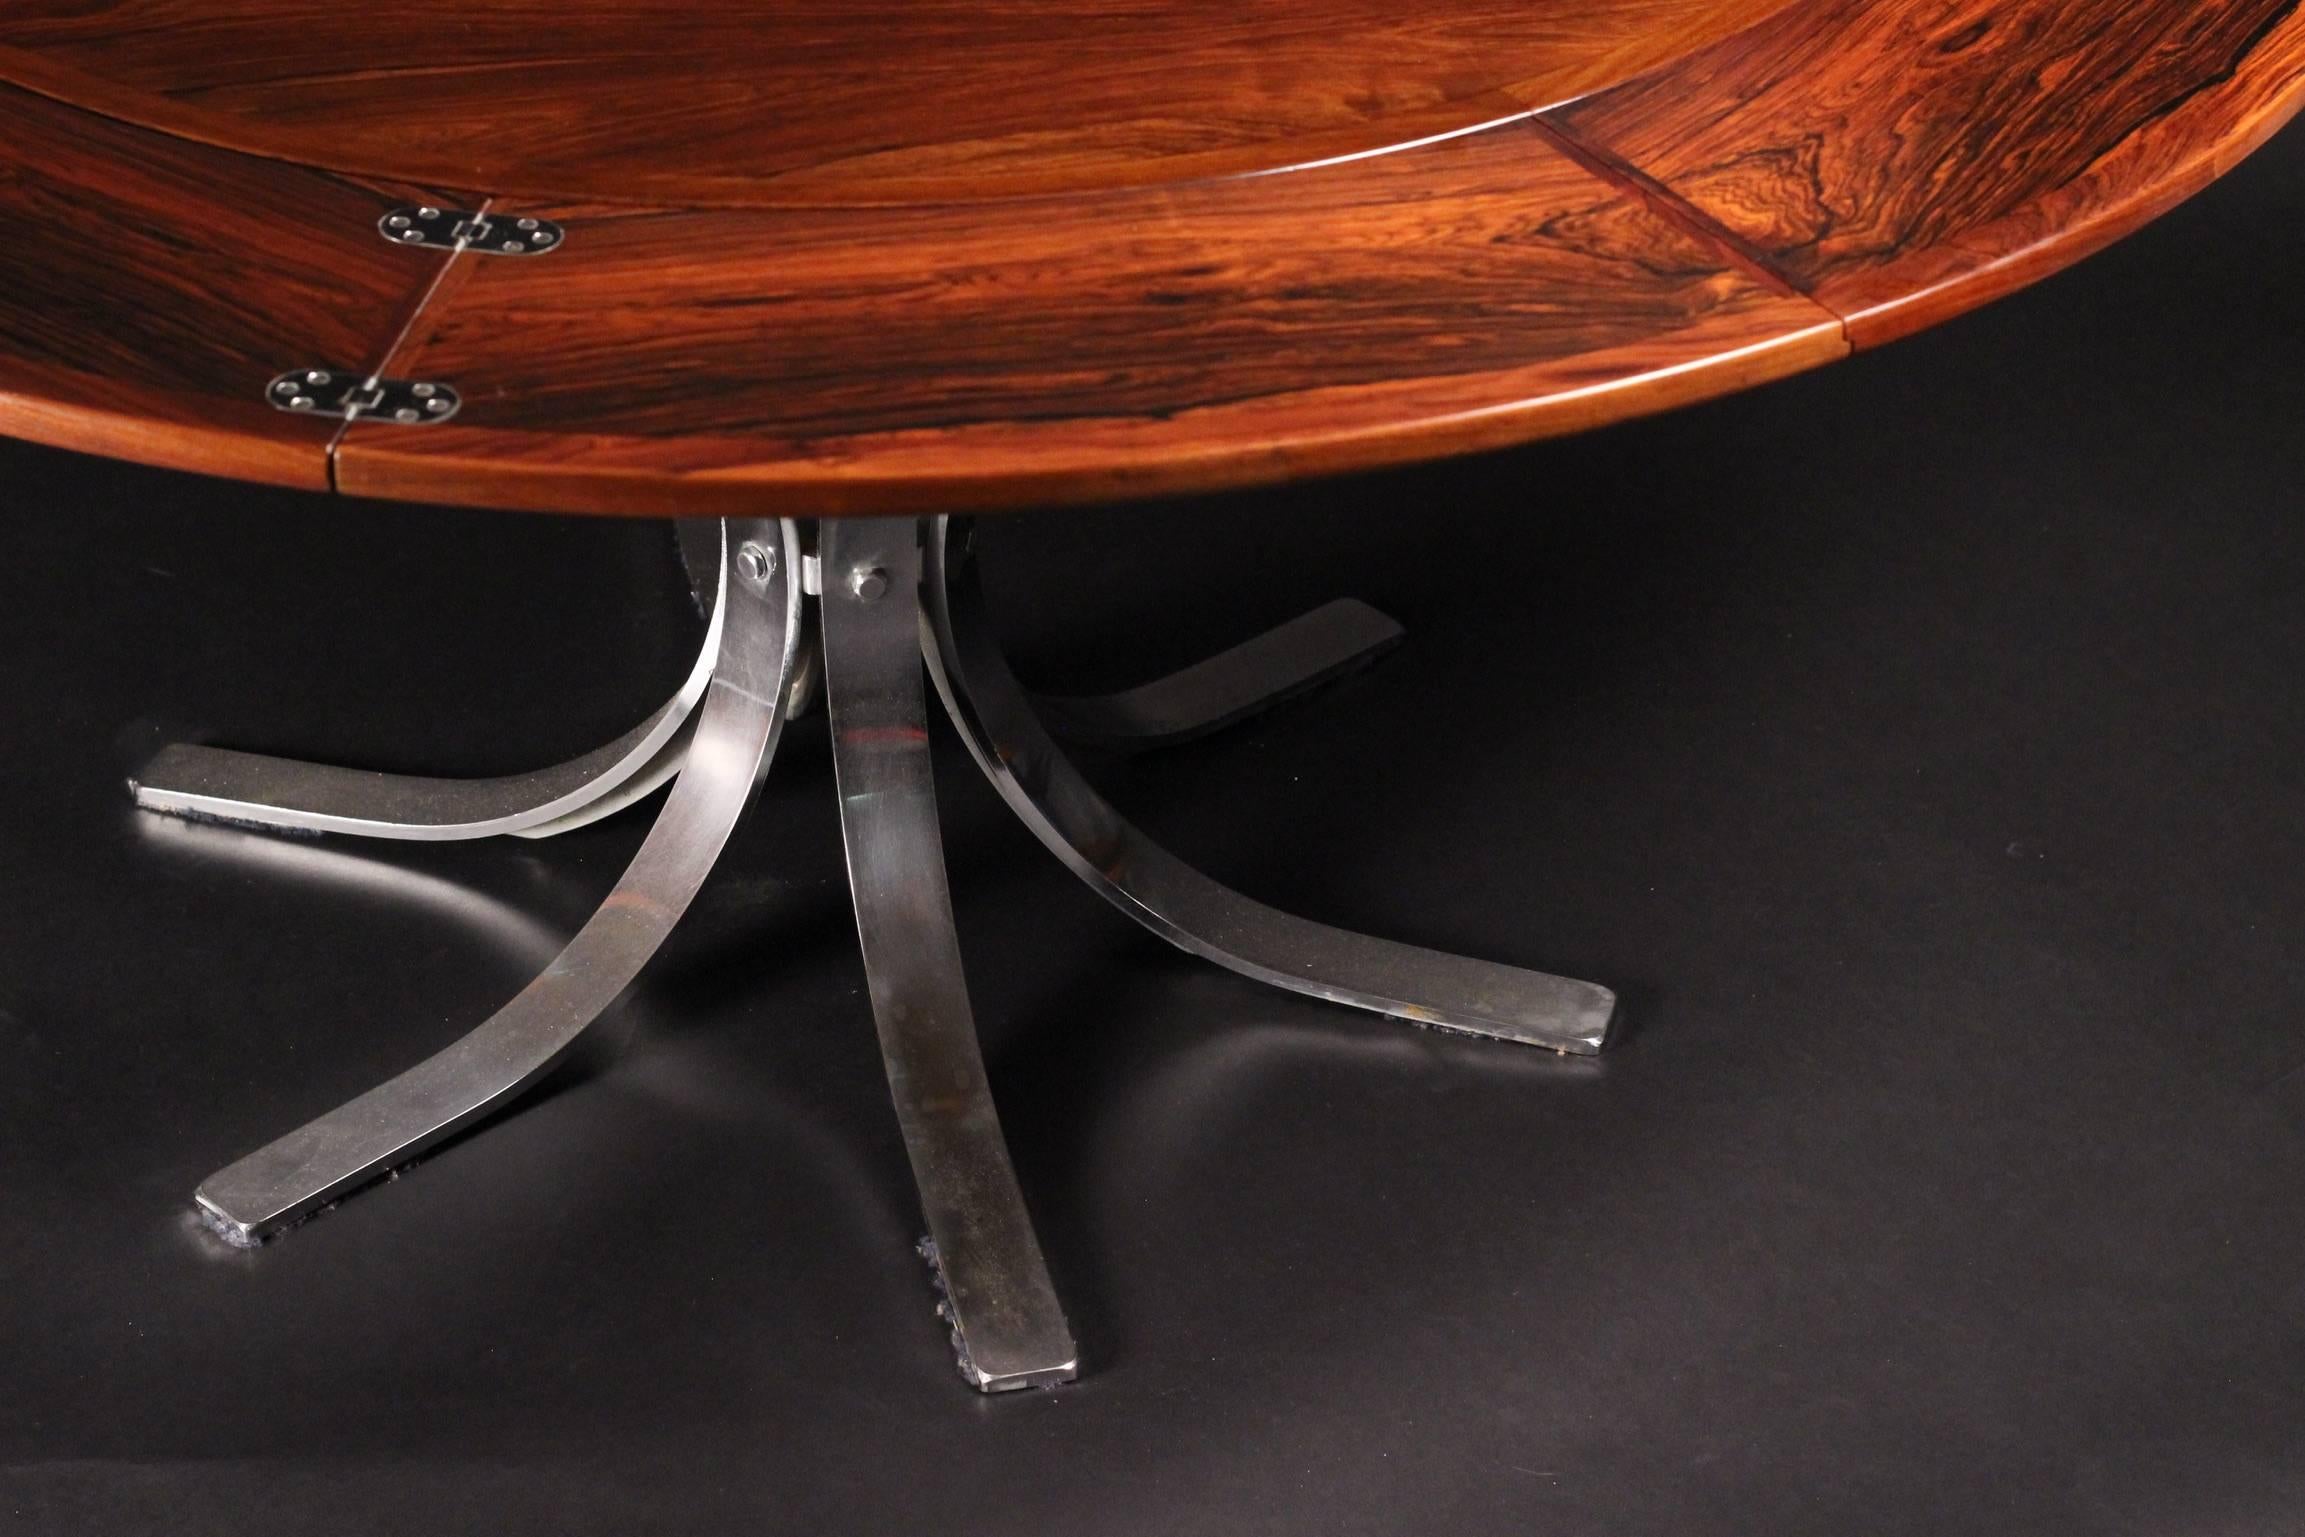 20th Century Scandinavian Modern Rosewood Dining Table by Dyrlund of Denmark. For Sale